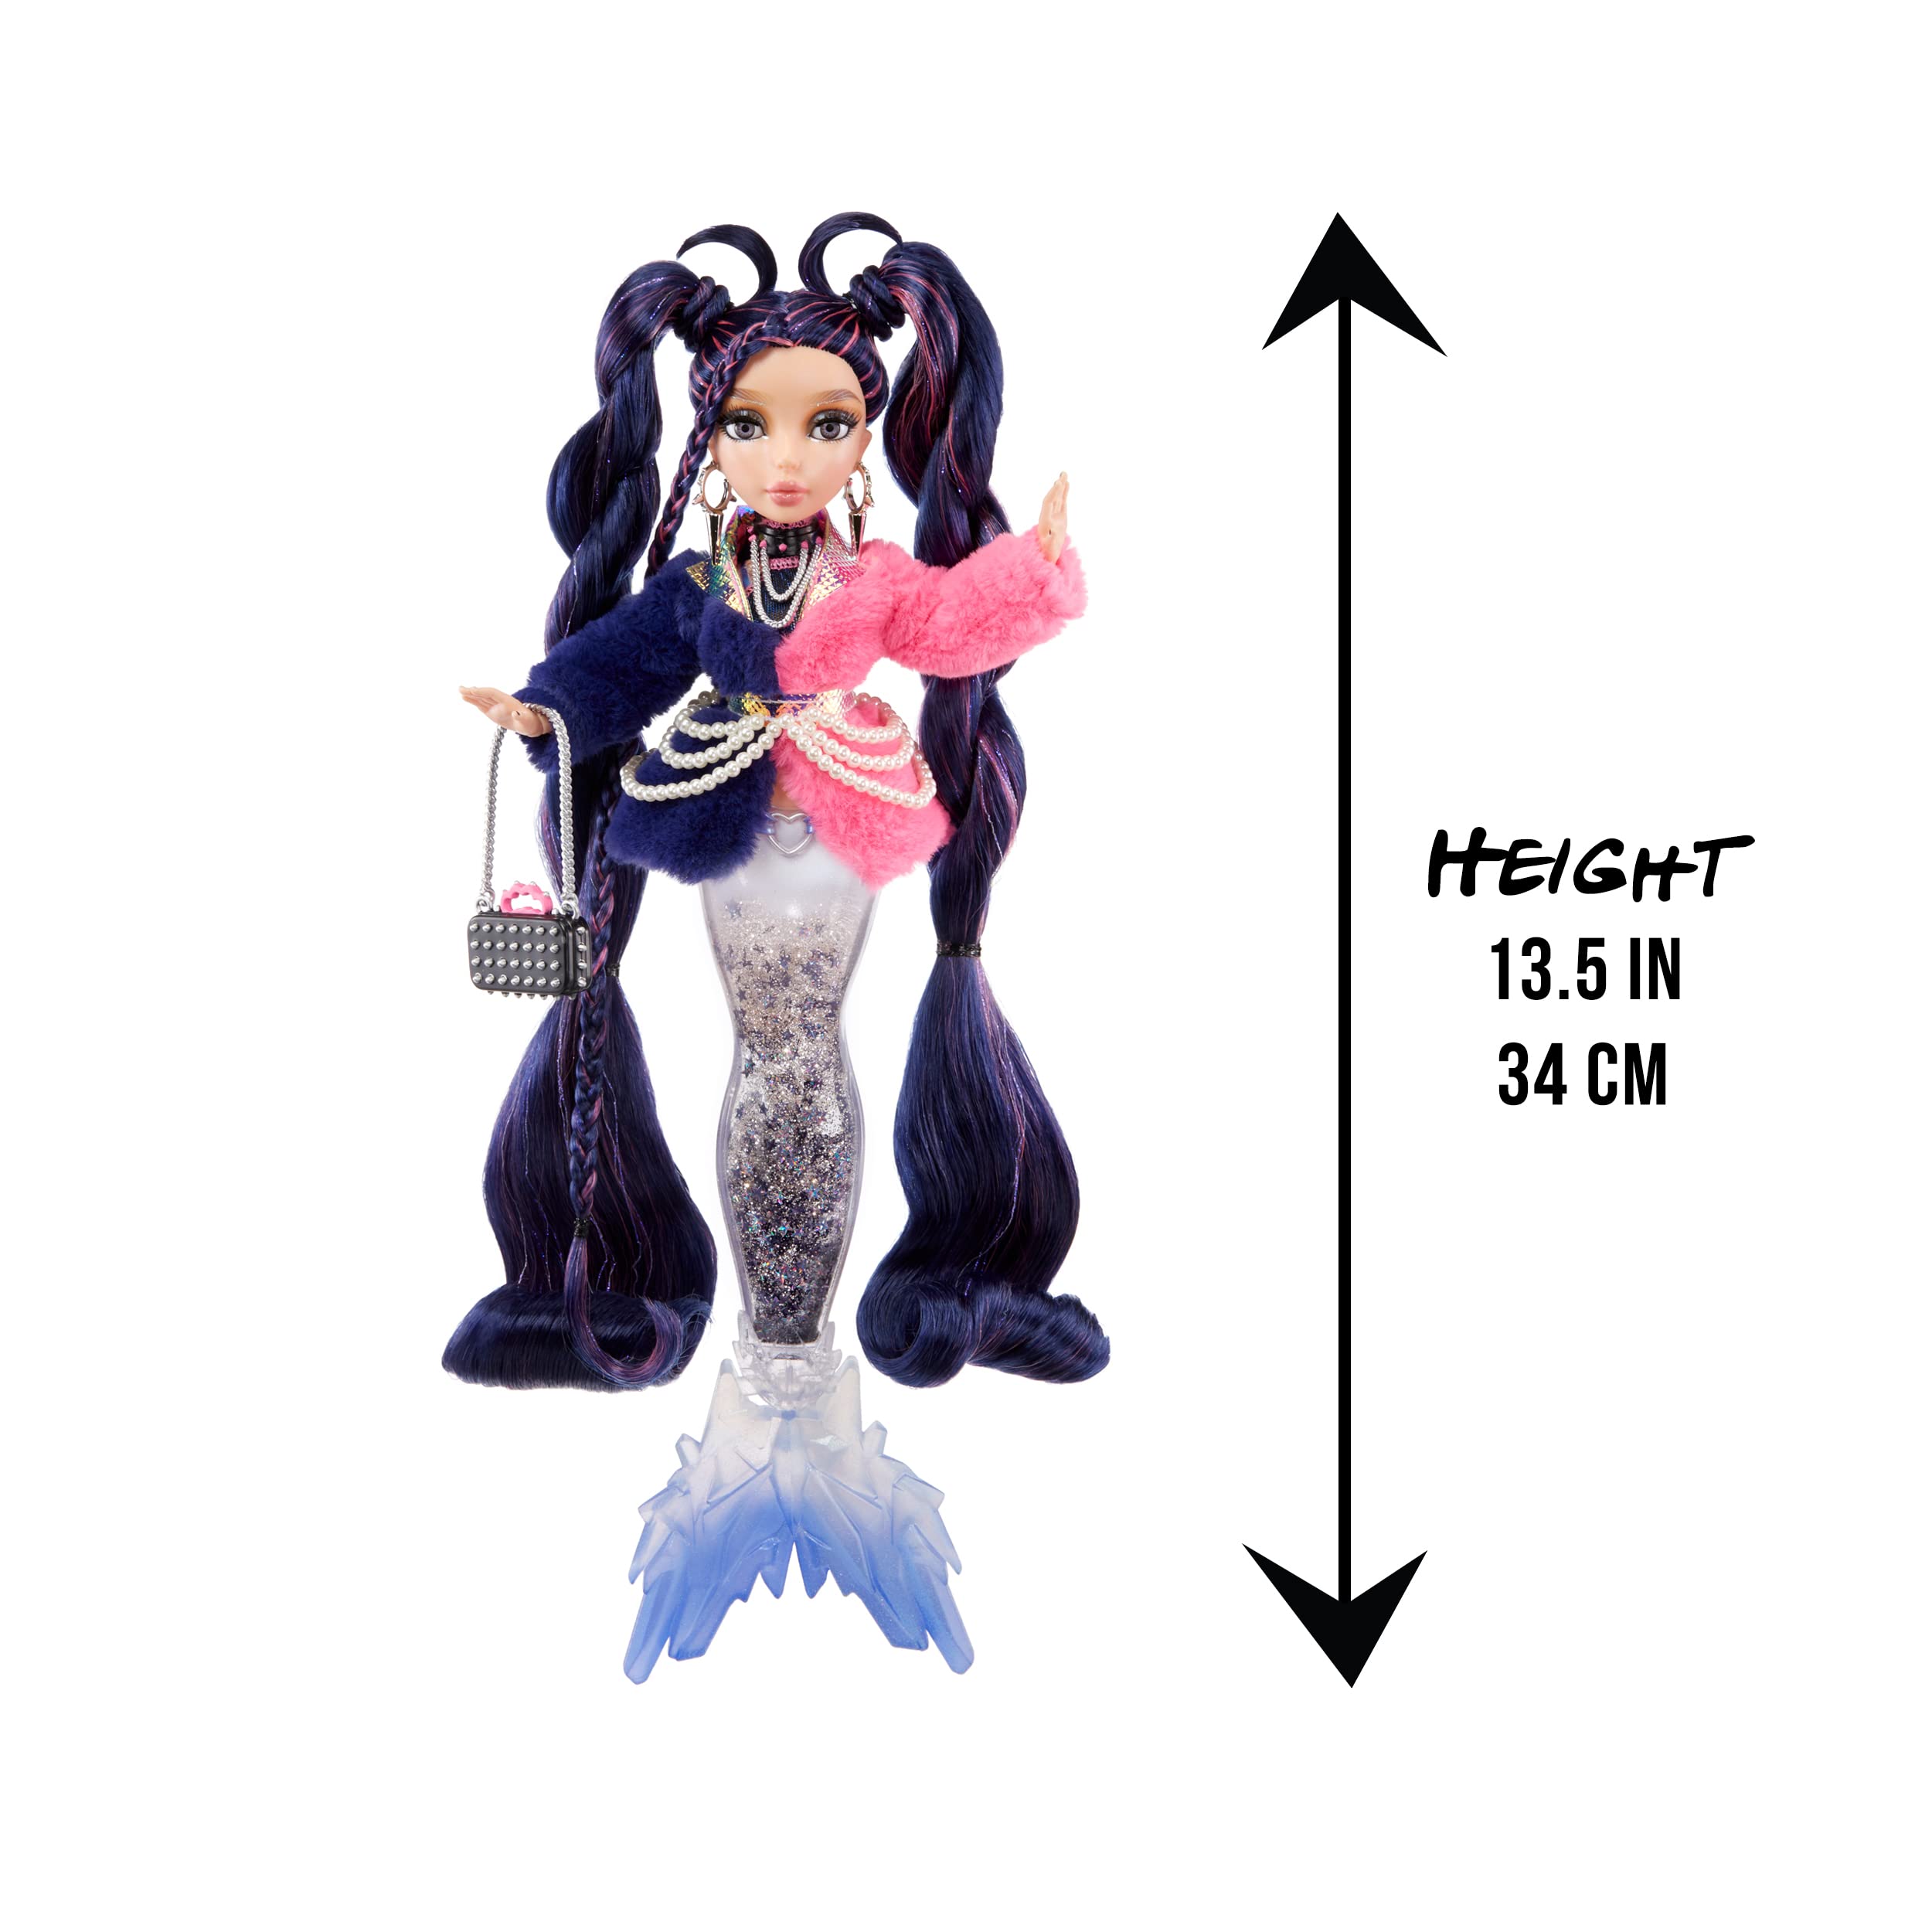 MERMAZE MERMAIDZ™ Winter Waves Nera™ Mermaid Fashion Doll with Color Change Fin, Glitter-Filled Tail and Accessories